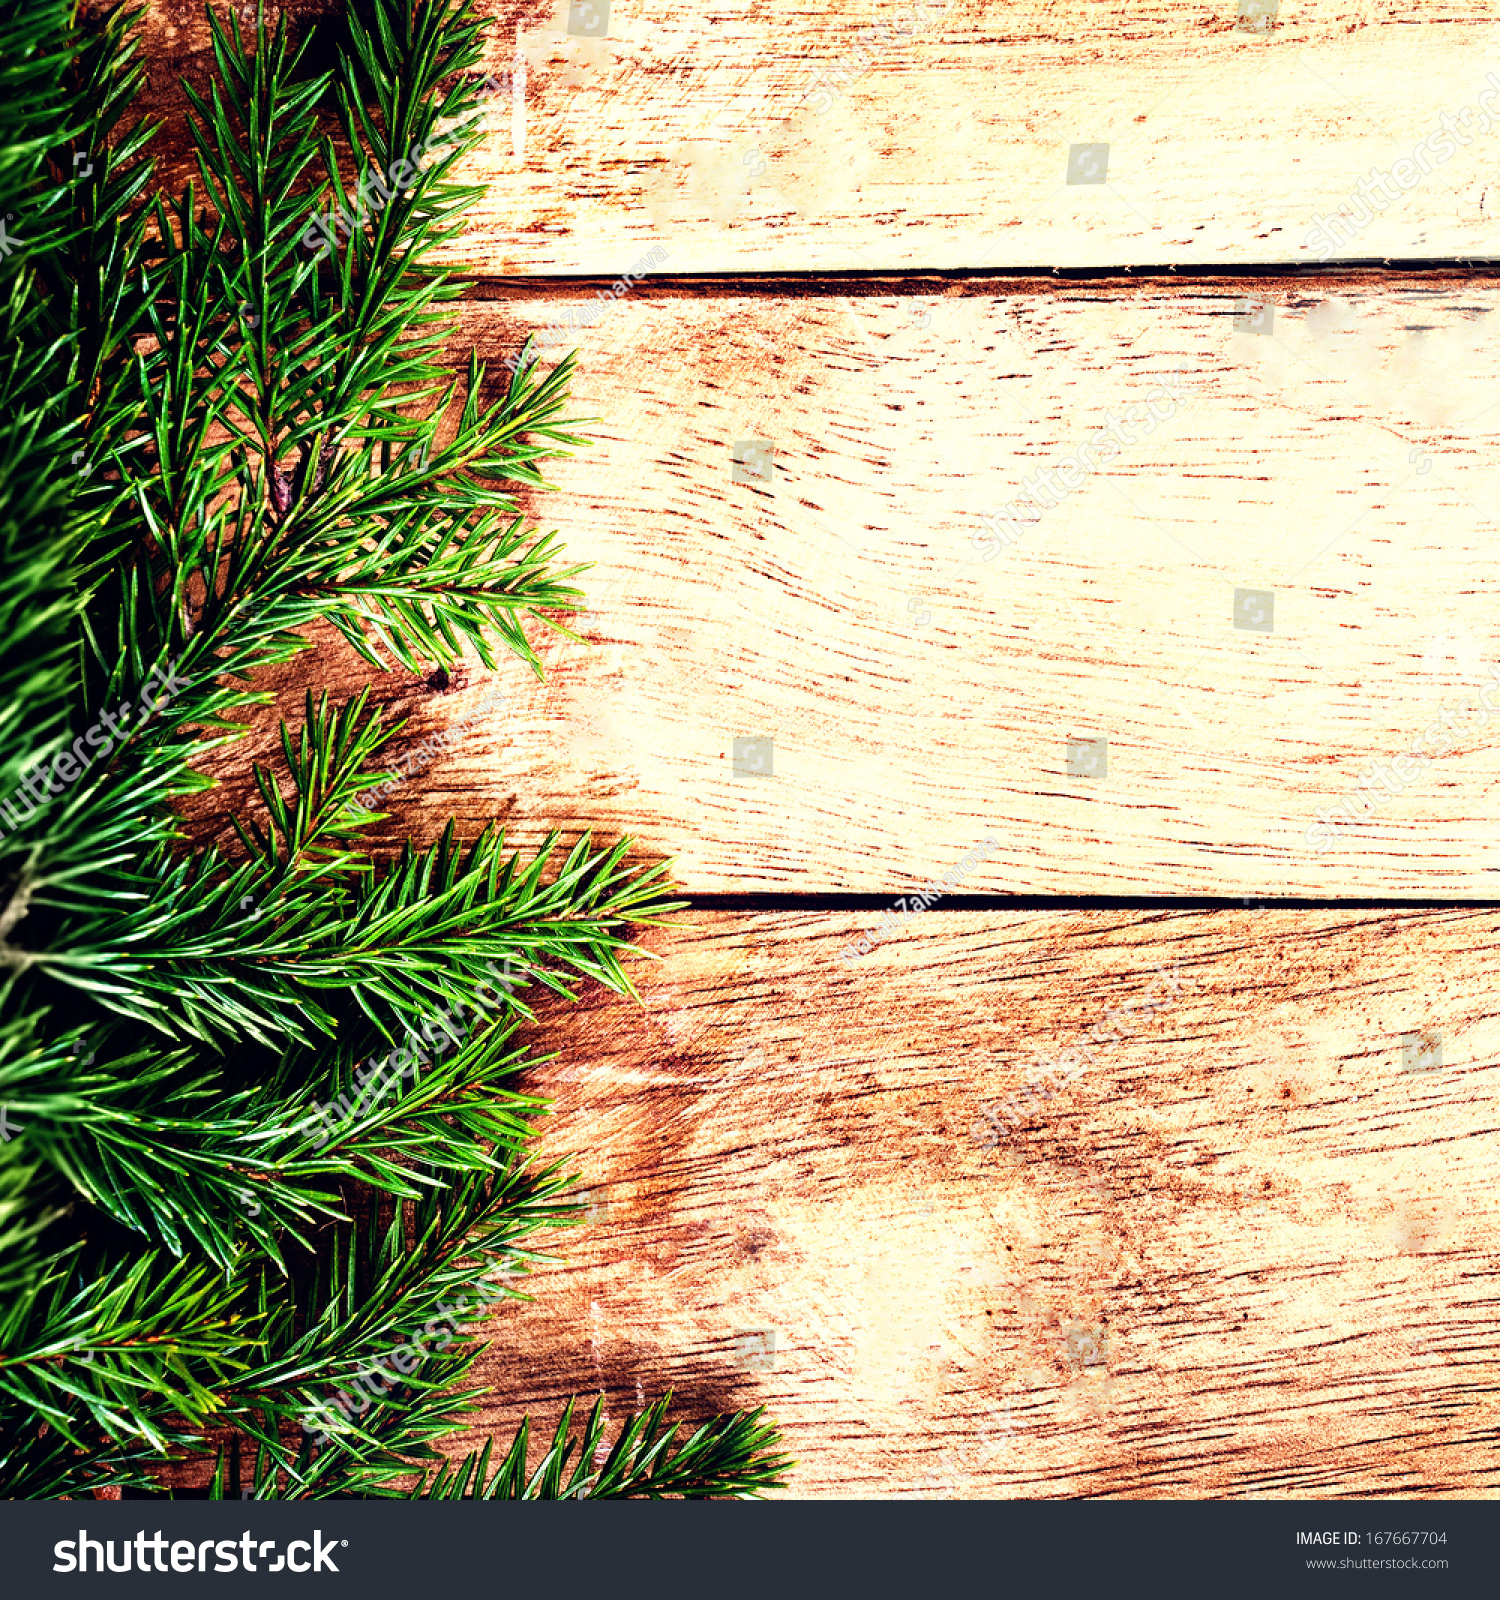 Christmas background with Fir Tree Branch over wood wall. Vintage Christmas Card with copyspace for greeting text. #167667704